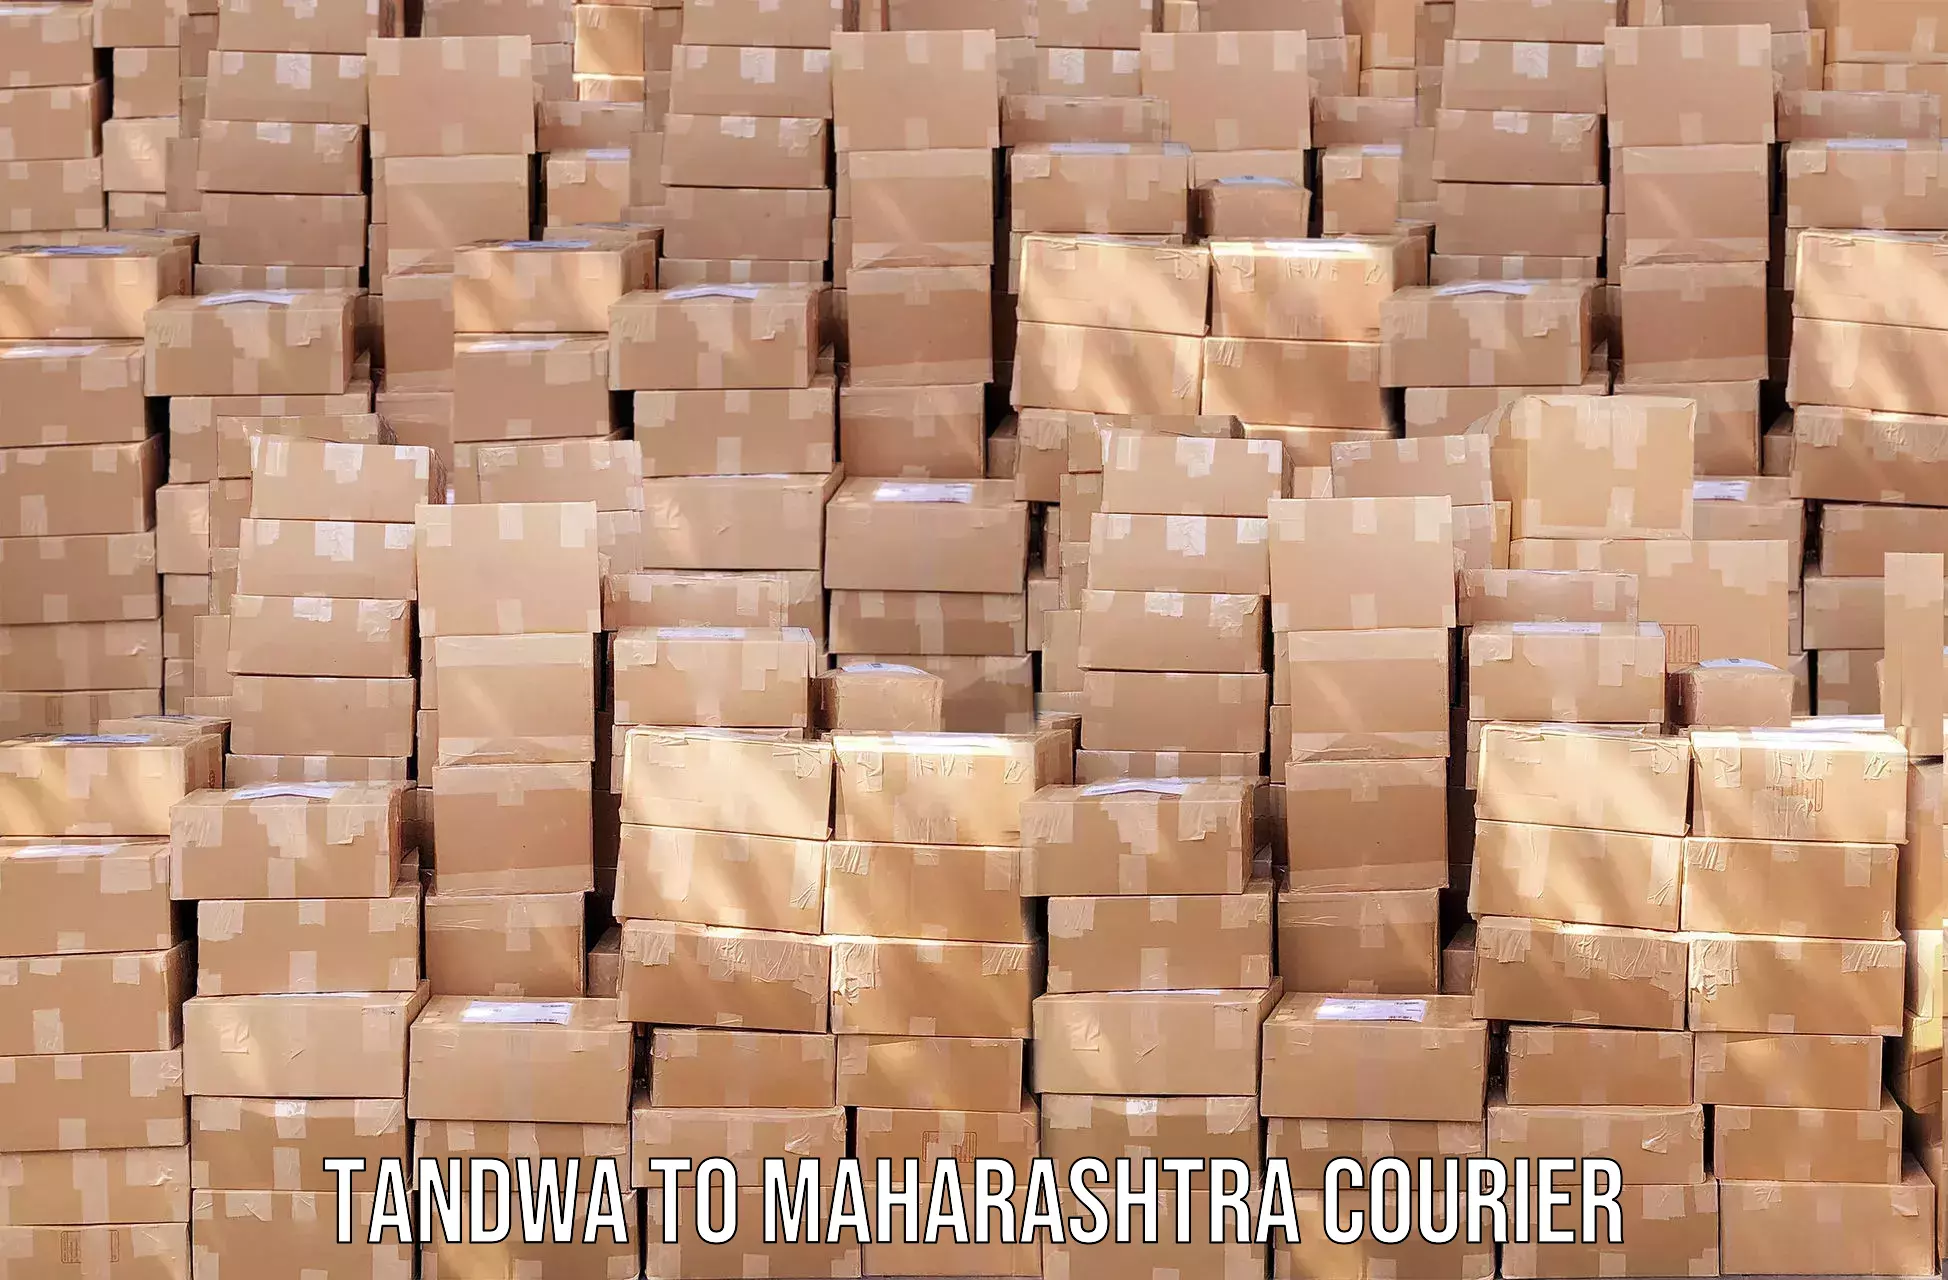 Courier service comparison in Tandwa to Karjat